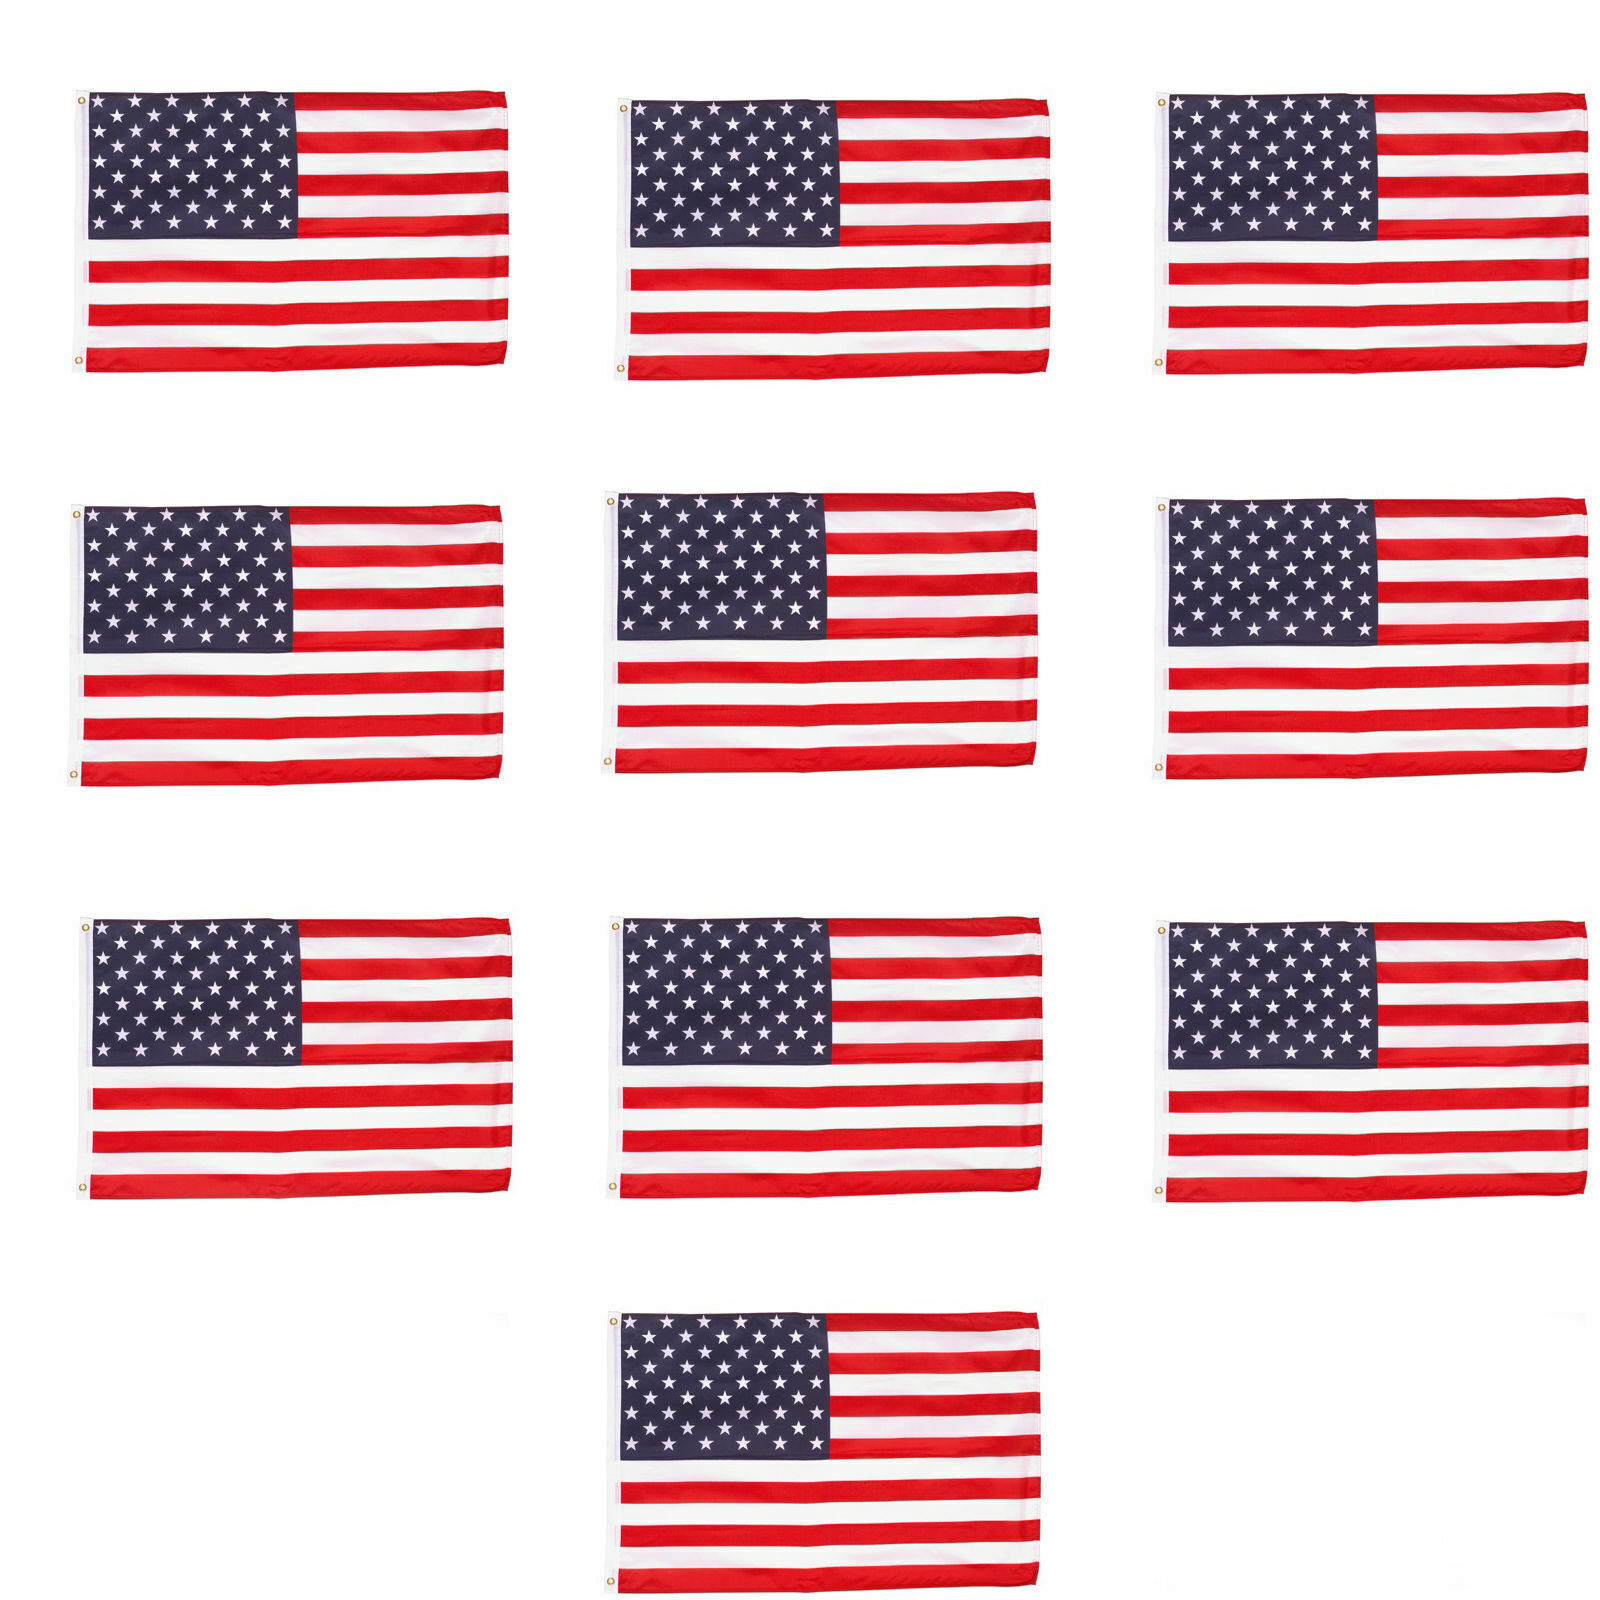 lot 10 4' x 6' ft. USA US American Flag Stars Grommets United States Wholesale